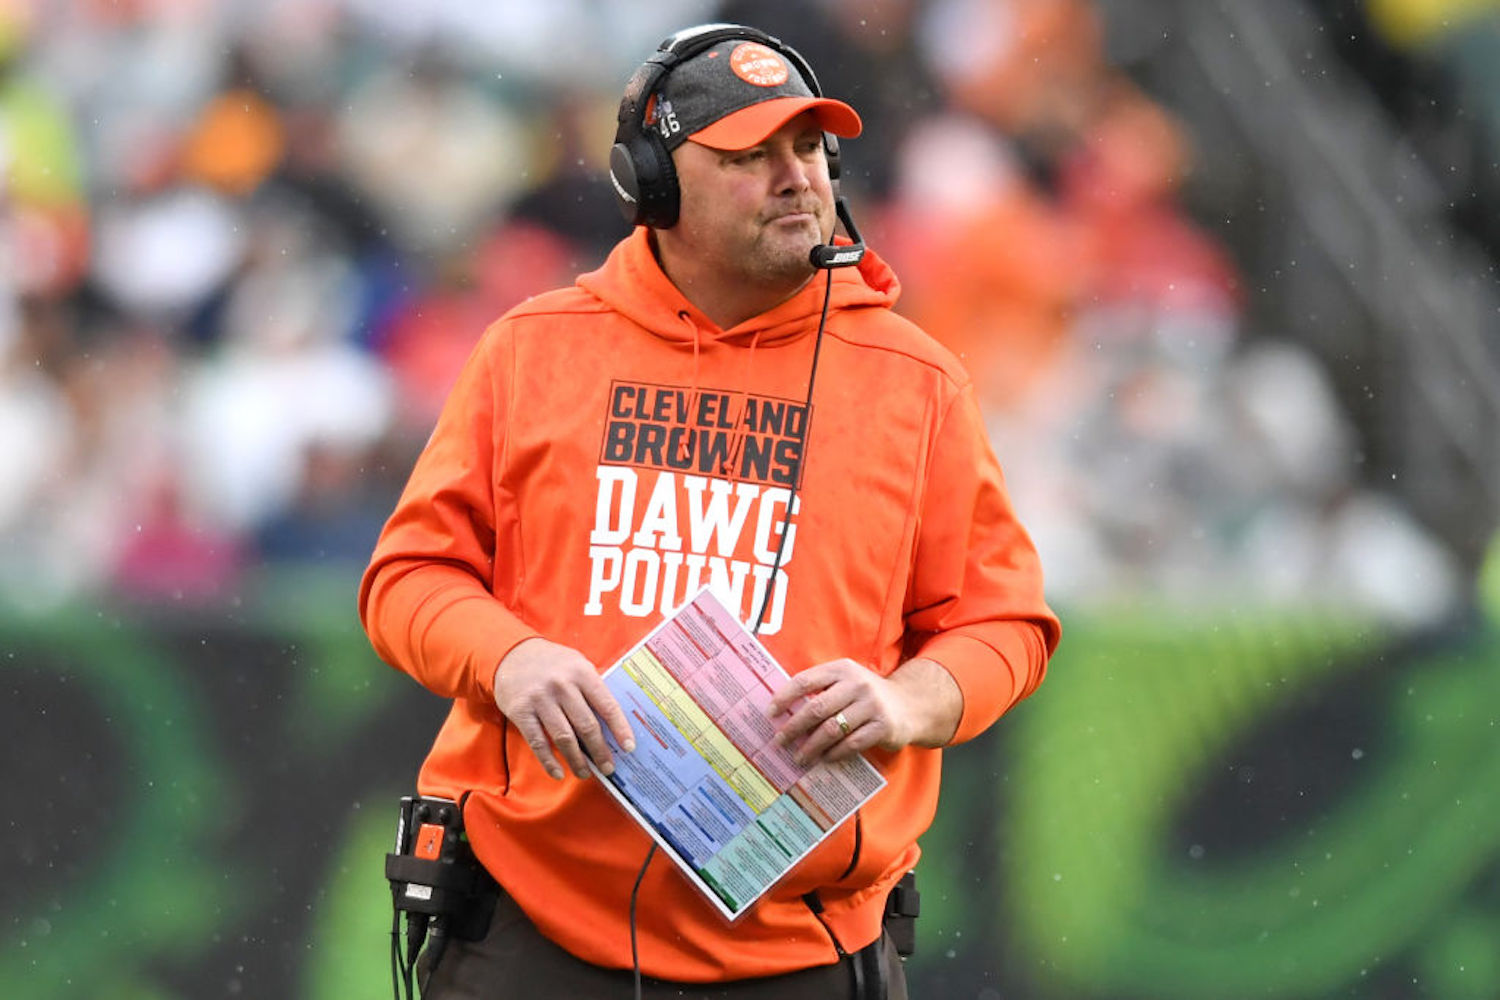 Freddie Kitchens had an underwhelming season with the Cleveland Browns in 2019, but COVID-19 has given him a chance for revenge this weekend.